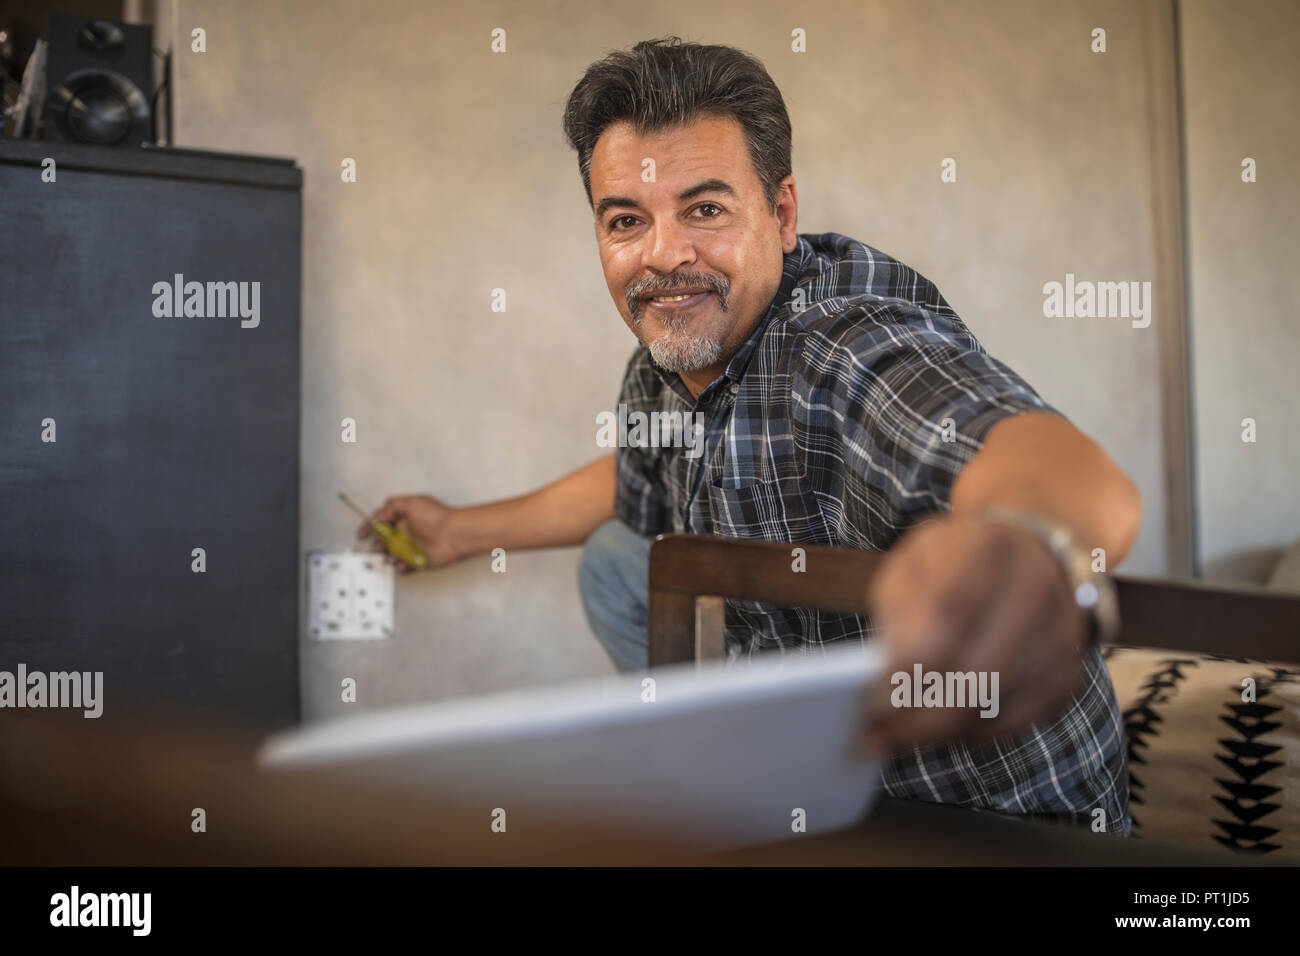 Portrait of content handyman with tablet Stock Photo